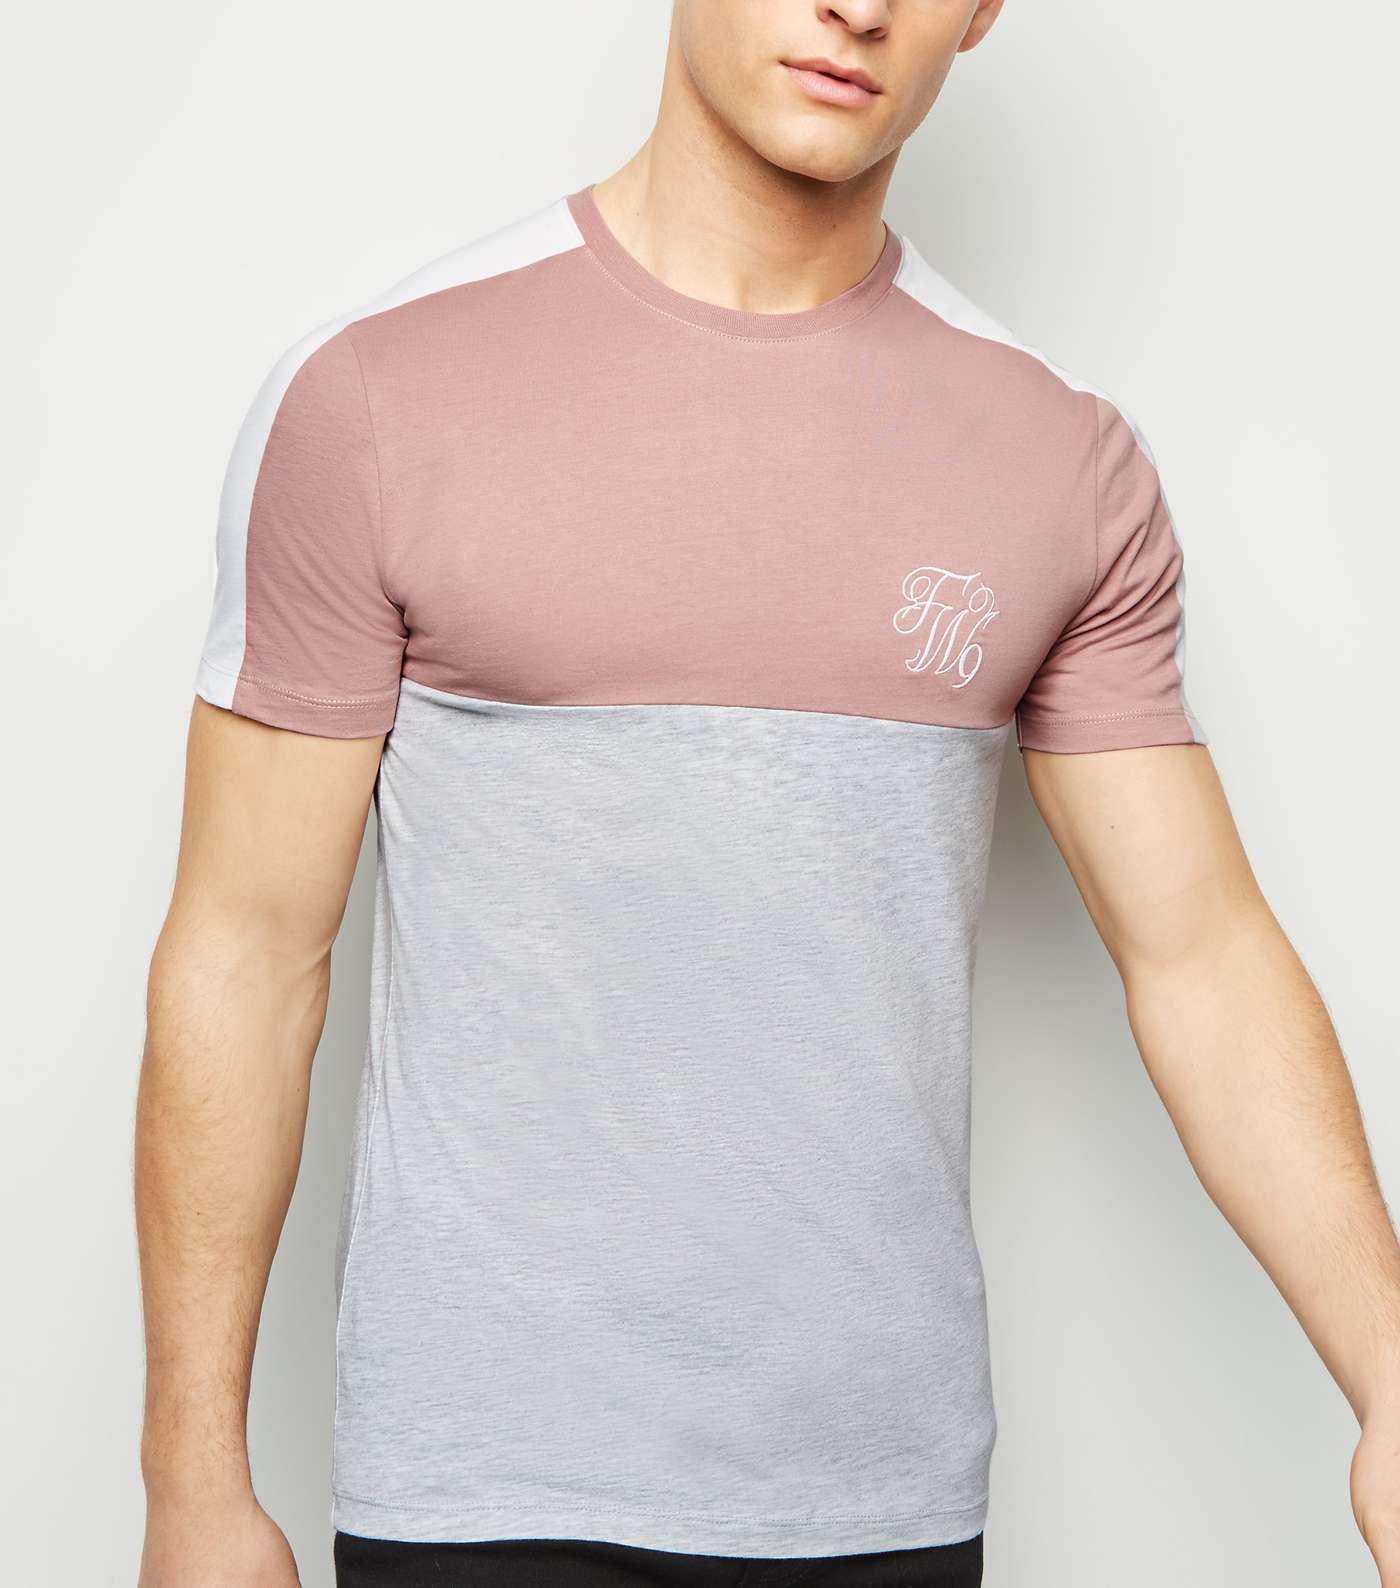 Mid Pink TW9 Embroidered Muscle Fit T-Shirt